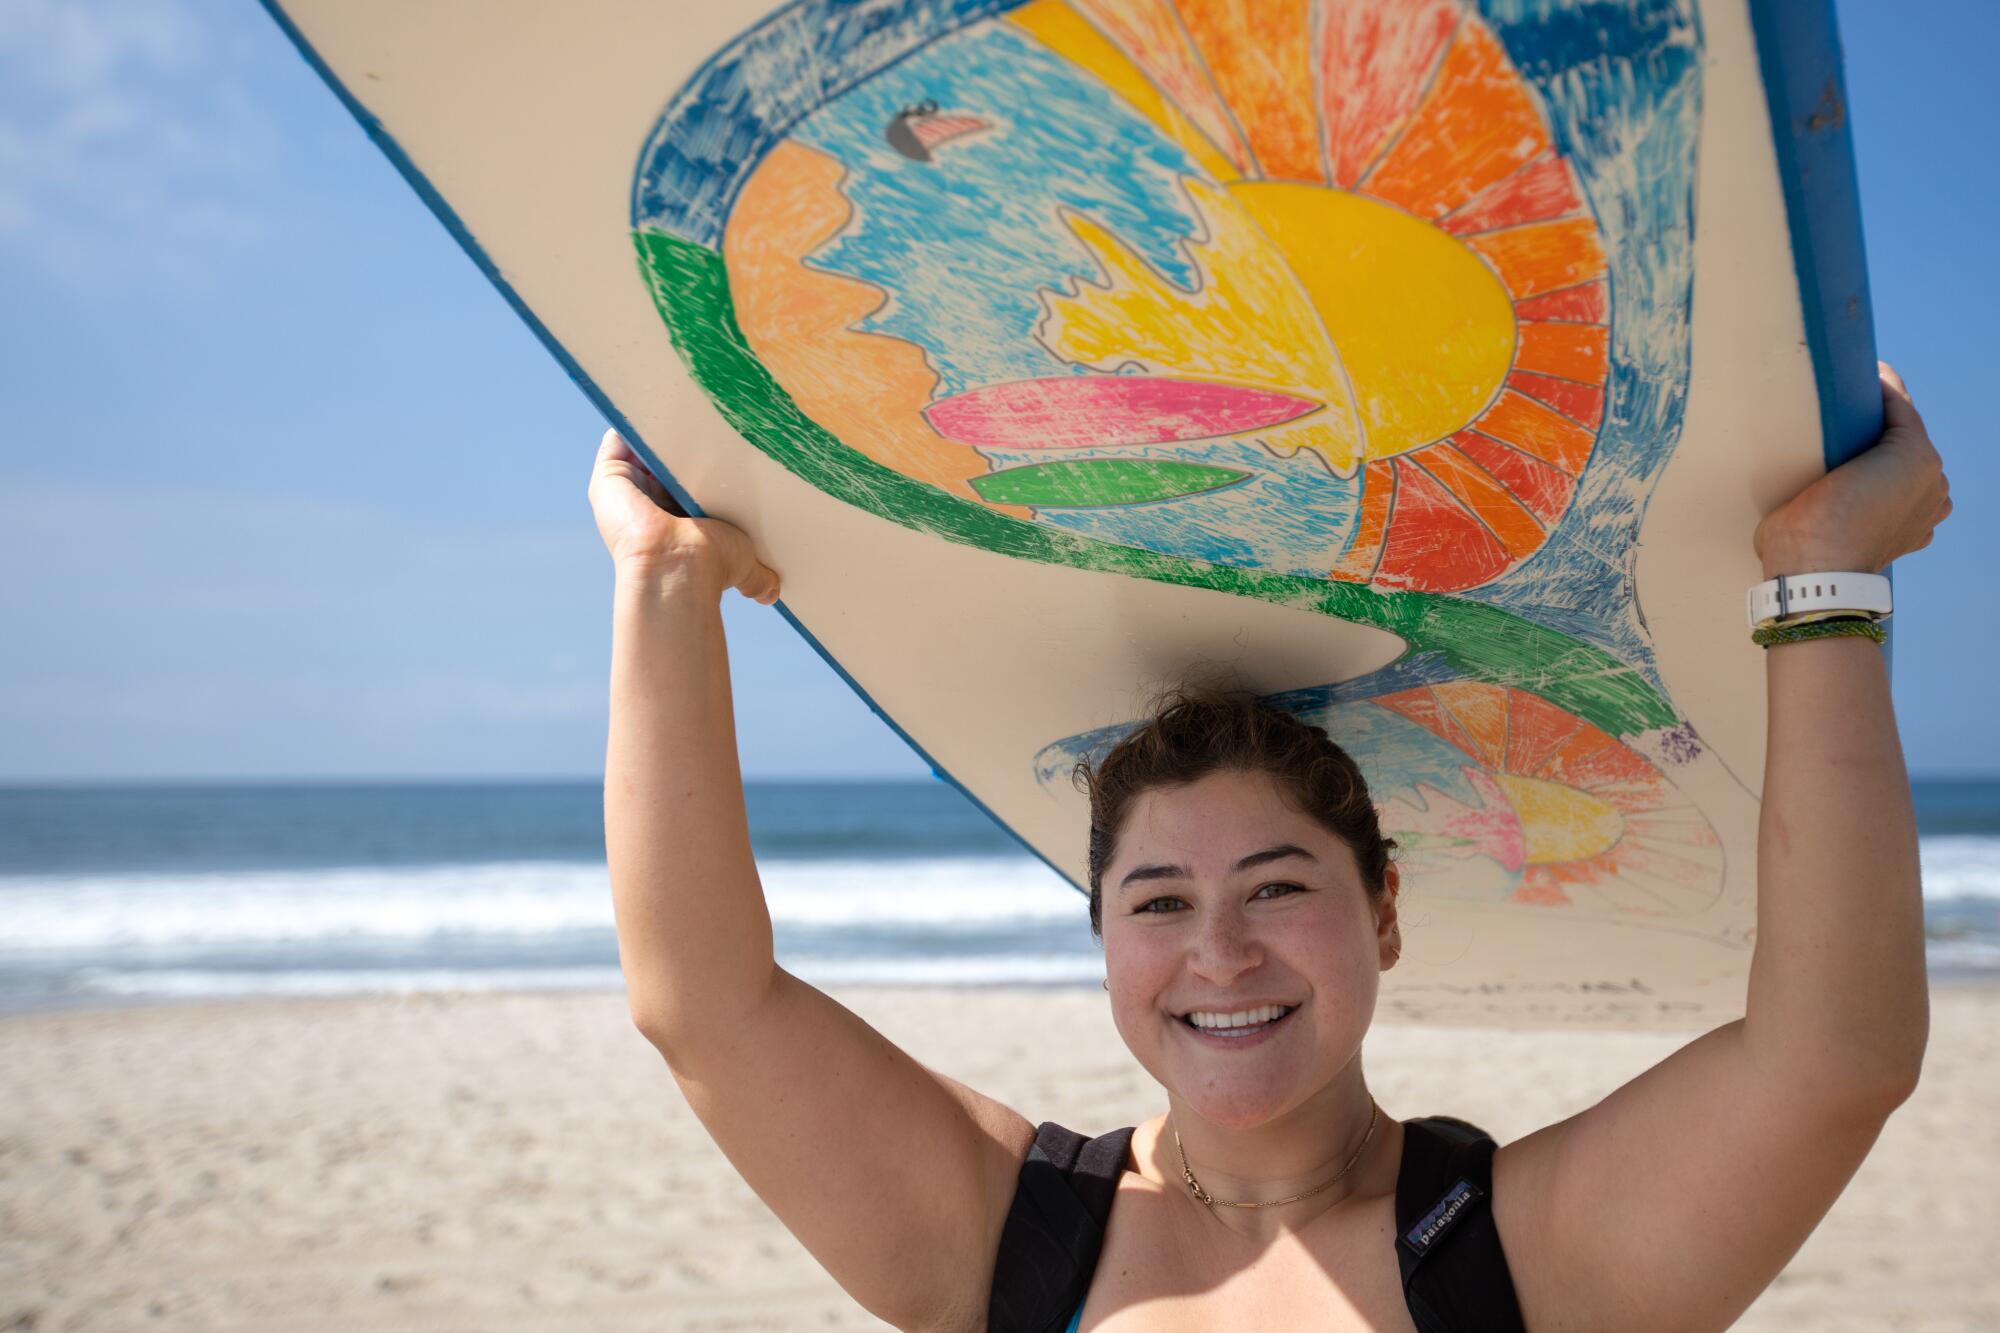 A woman on the beach holds a surfboard over her head.